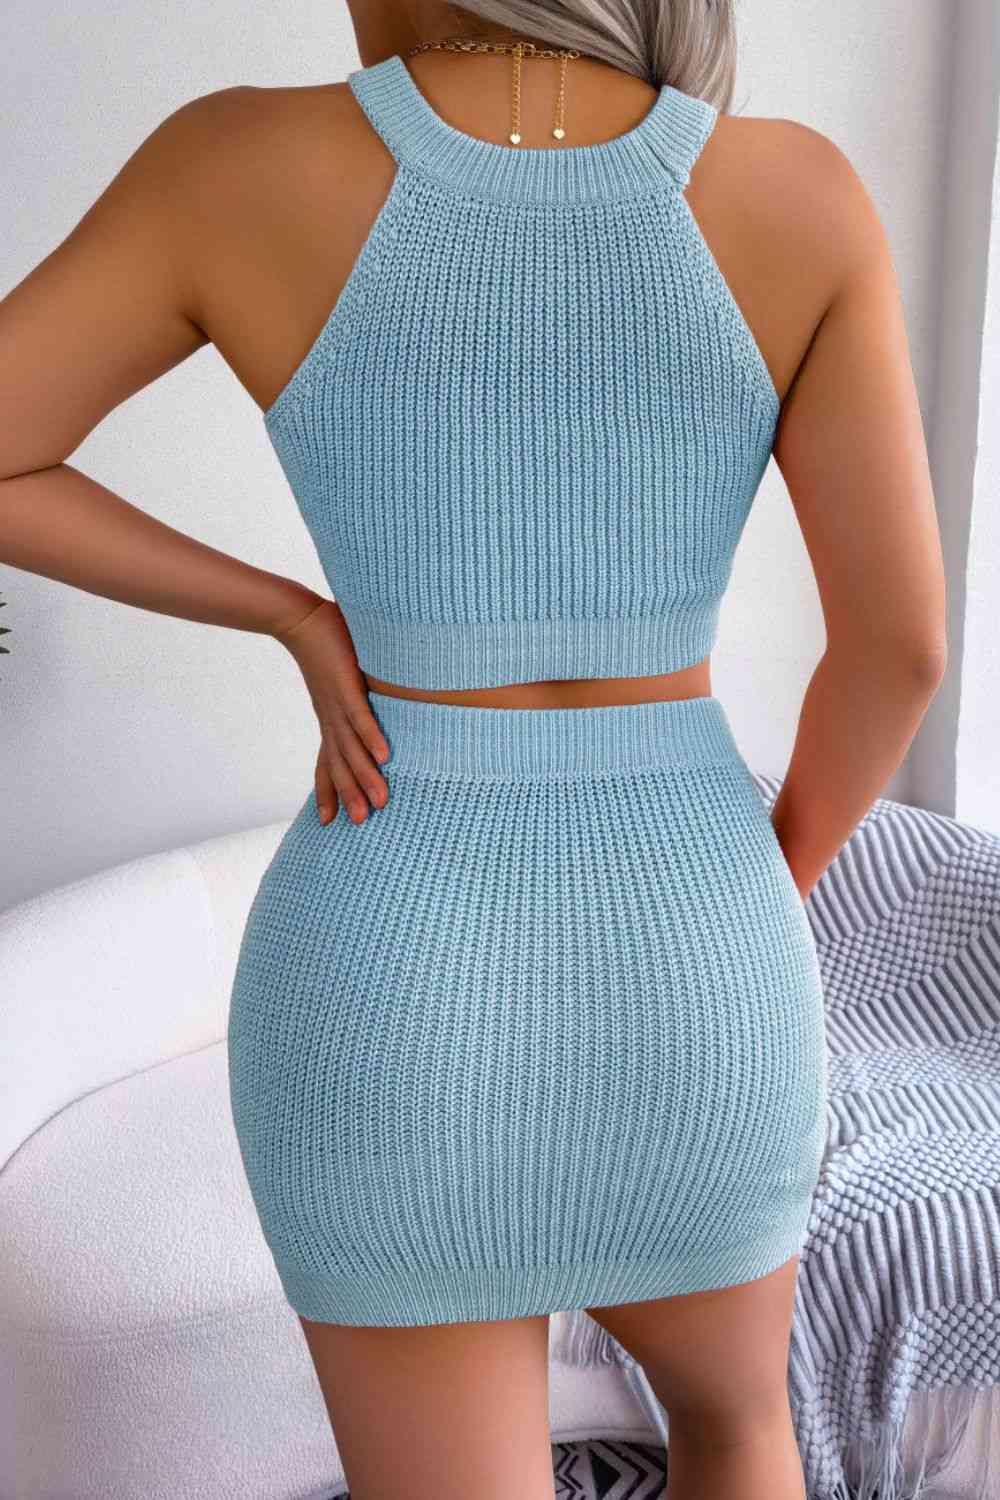 Women's Contrast Ribbed Sleeveless Knit Top and Skirt Set